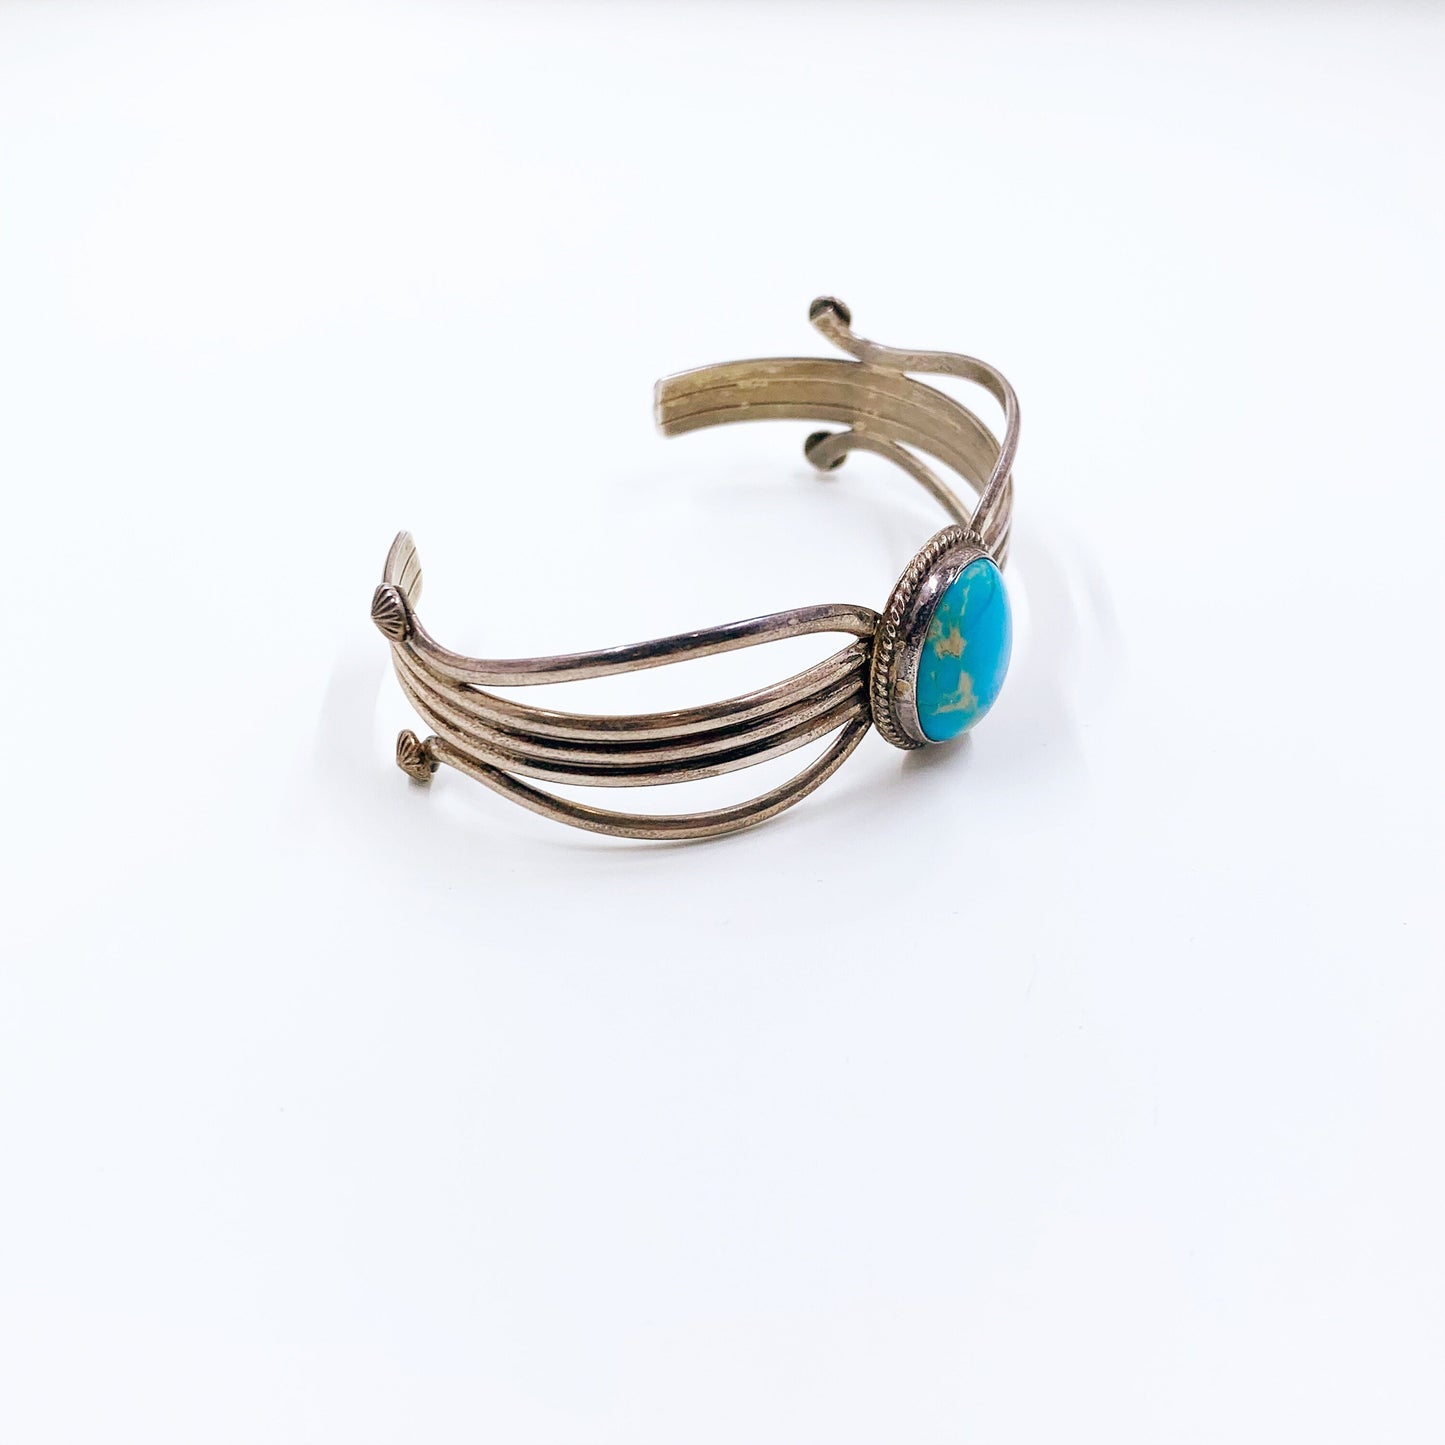 Vintage Silver Turquoise Cuff | Signed Southwest Silver Cuff Bracelet